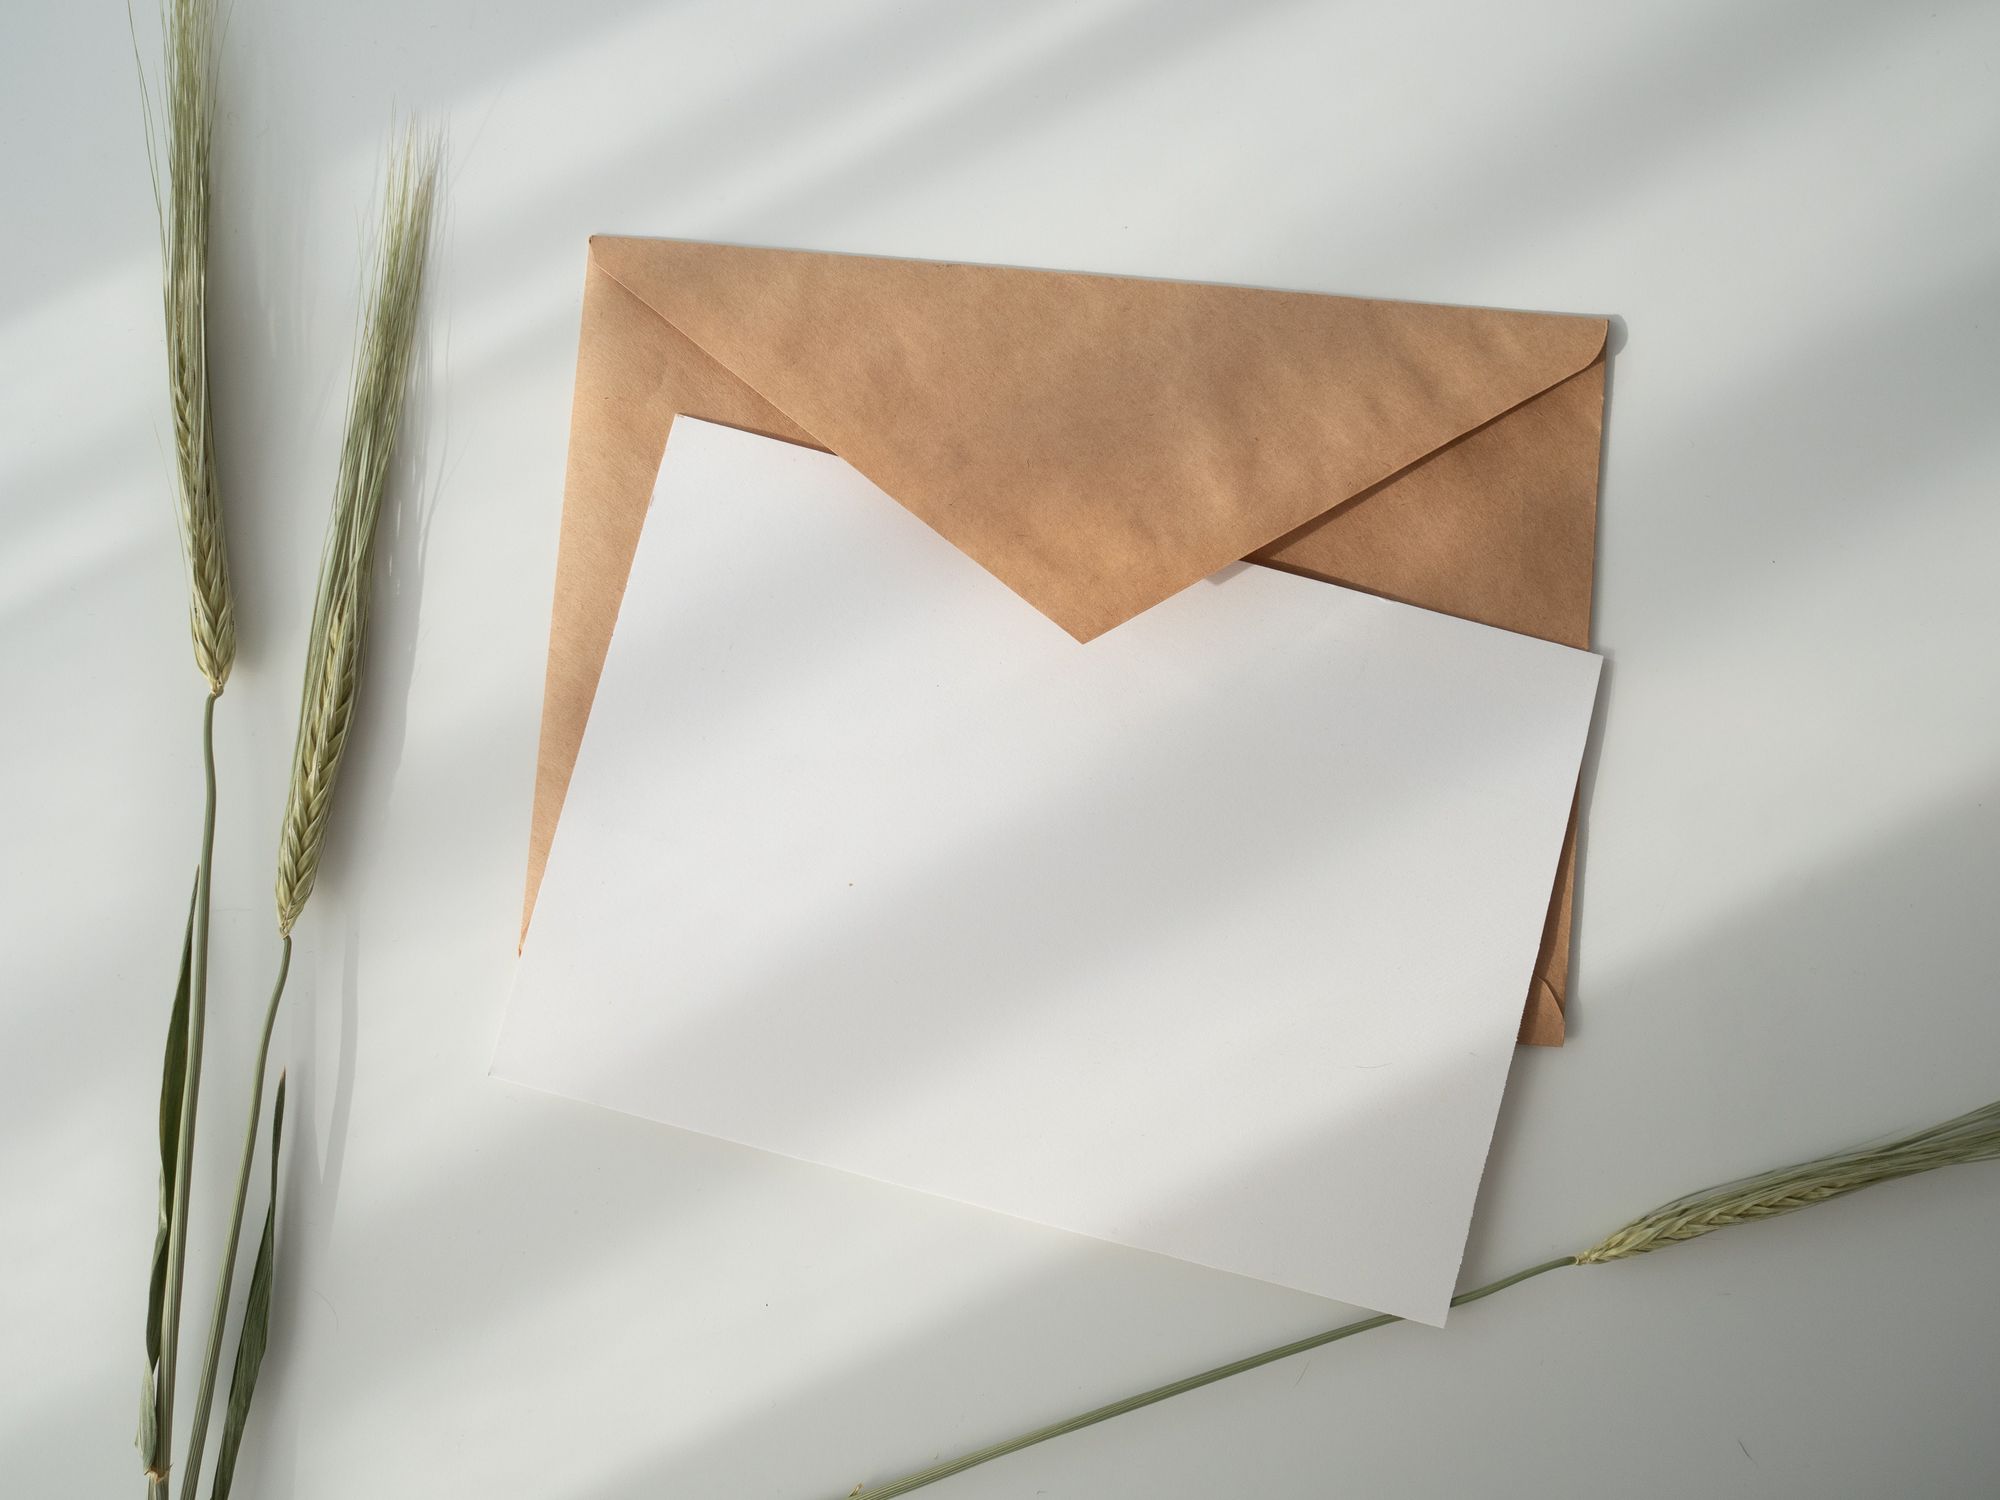 Blank note card on top of an envelope.